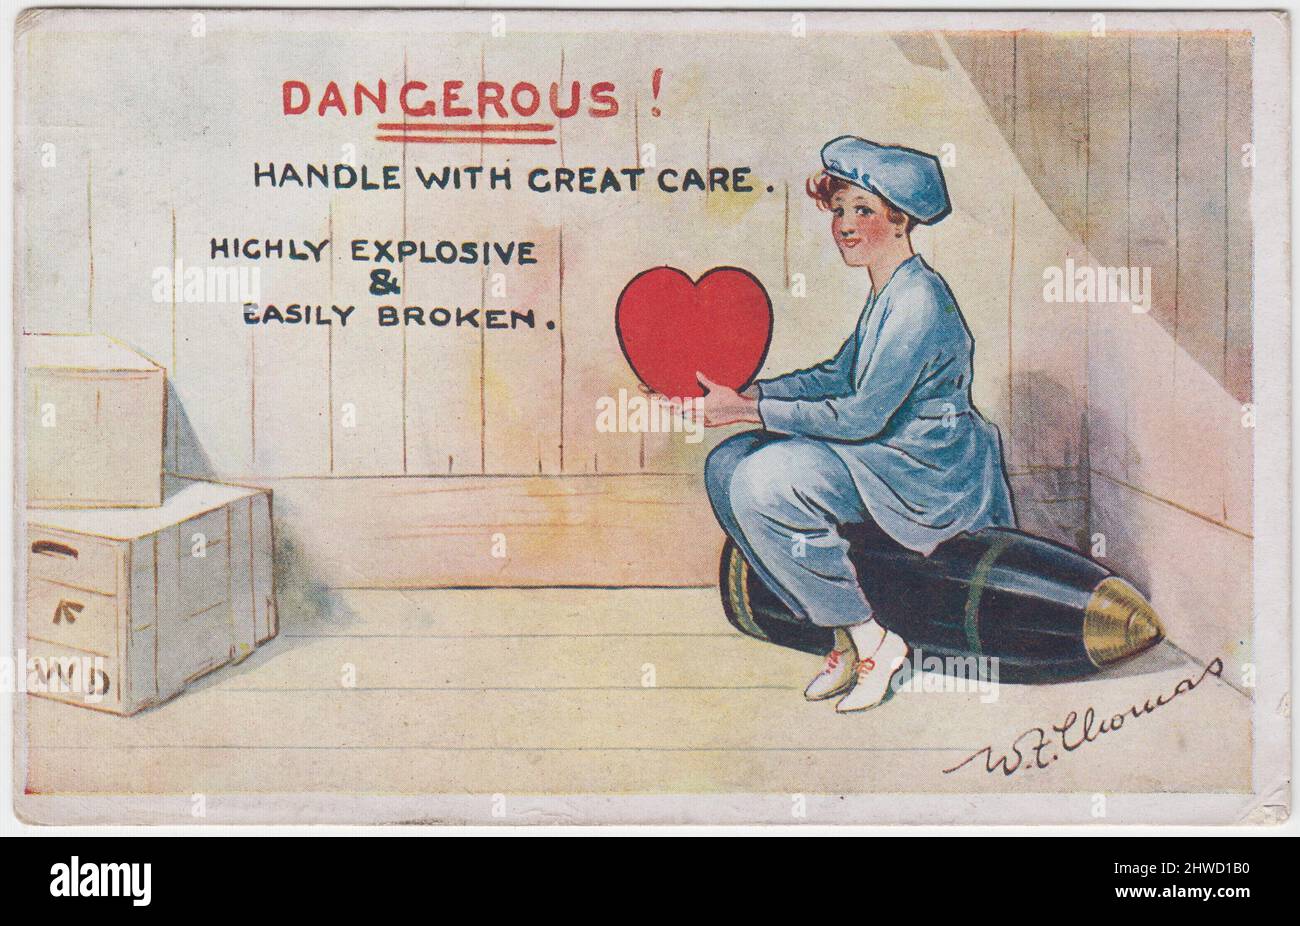 'Dangerous! Handle with great care. Highly explosive & easily broken': cartoon showing a woman munitions worker dressed in work clothes sitting on a large shell whilst holding a large red heart. Crates are piled up in the other corner. The colour image was sold as a postcard - this one was posted in 1918 Stock Photo